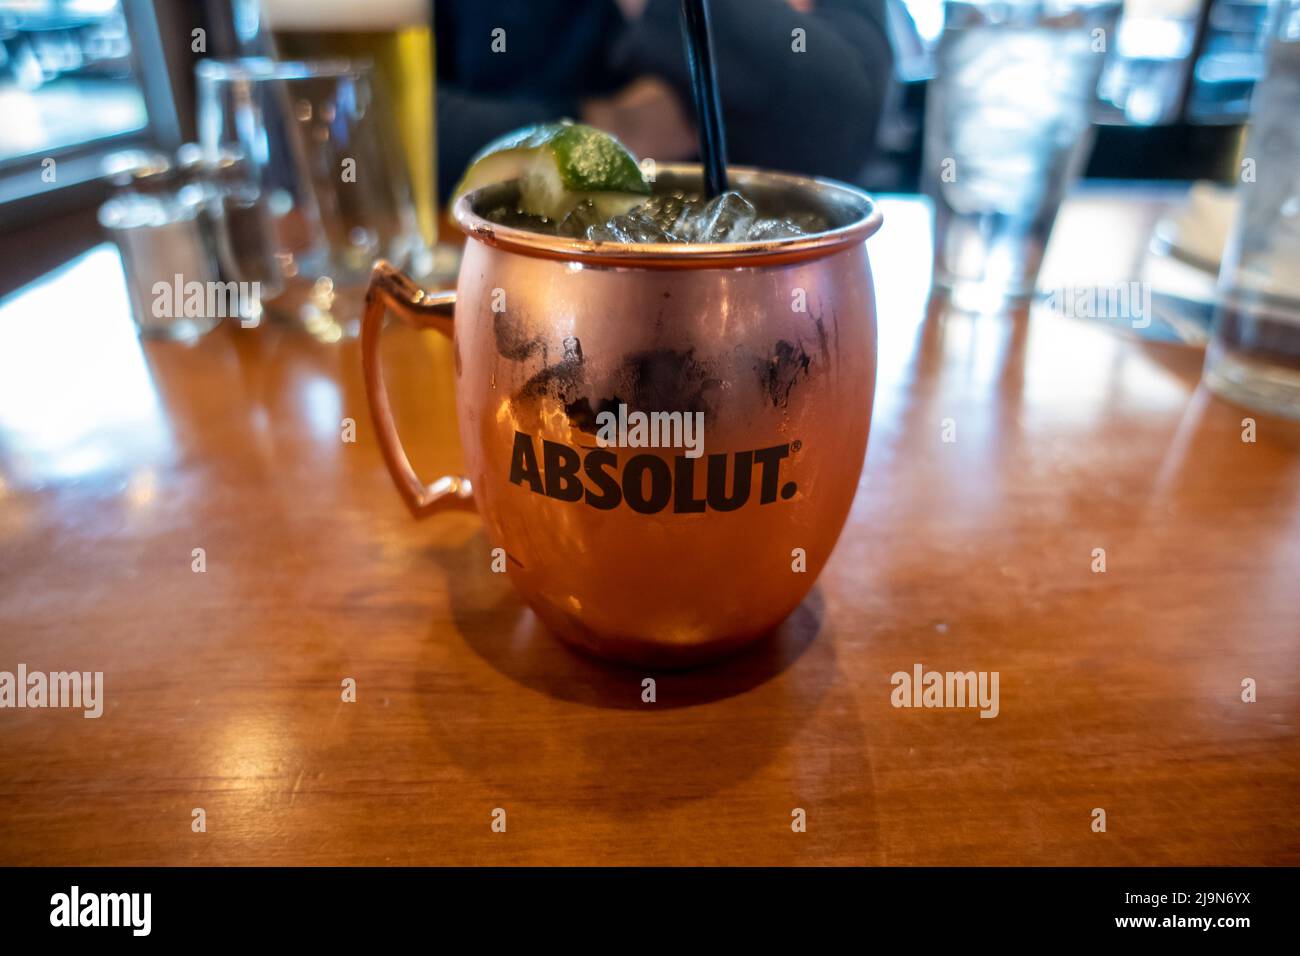 Seattle, WA USA - circa May 2022: Selective focus on a Moscow Mule alcoholic drink in a copper mug on a table inside a restaurant. Stock Photo